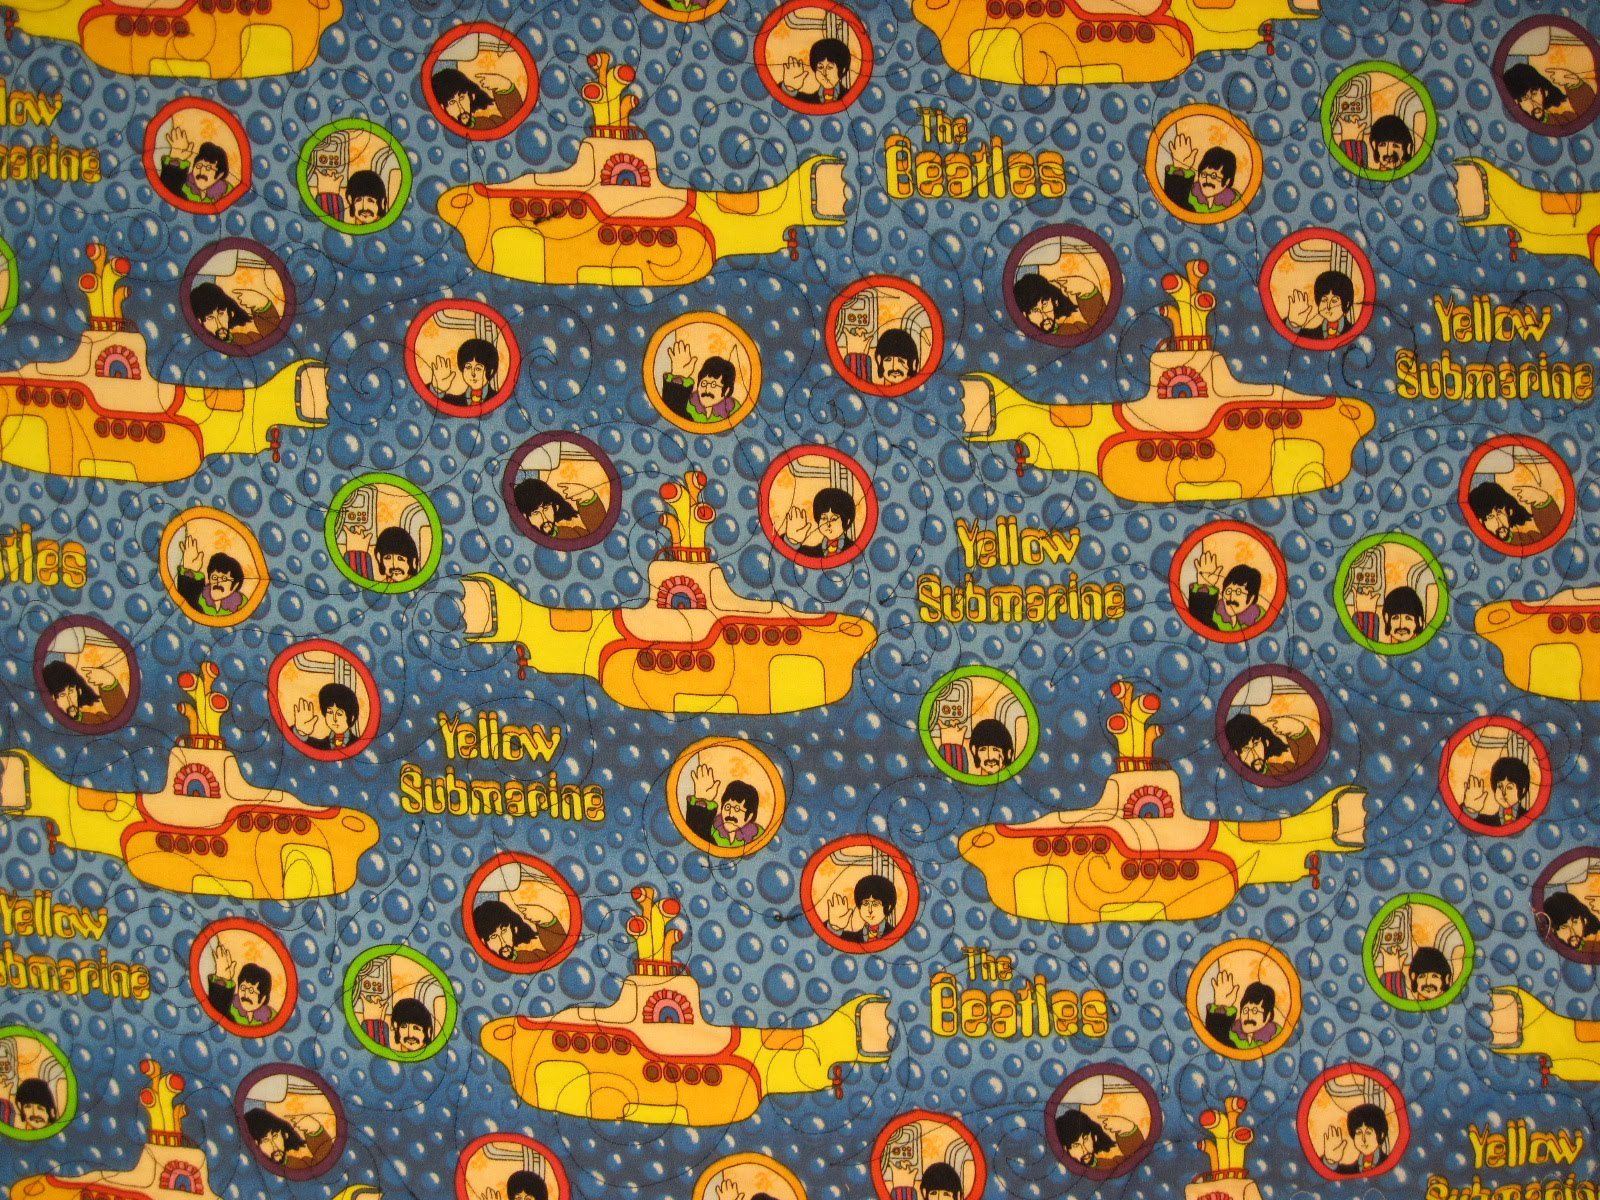 Had some left over Yellow Submarine fabric and other Beatles fabric so